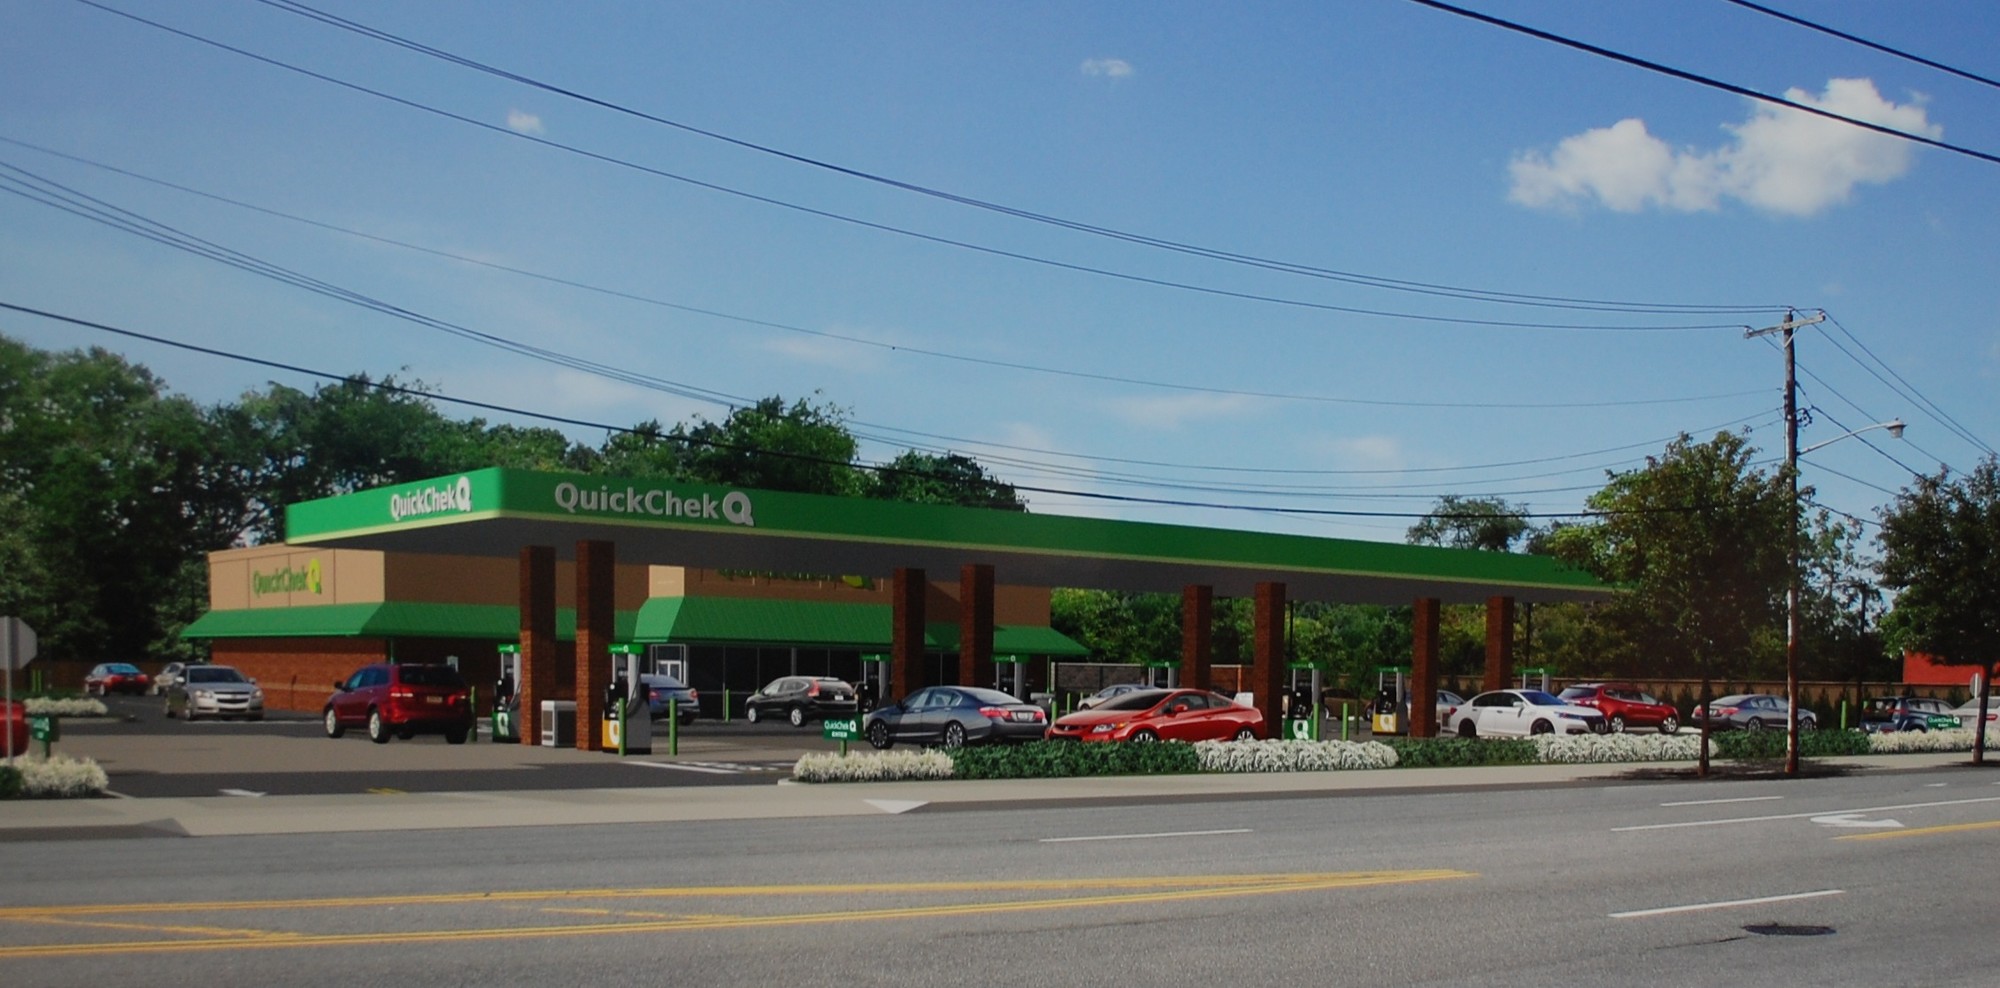 An Artist’s rendering of the QuickChek gas station and convenience store proposed for Merrick Road.